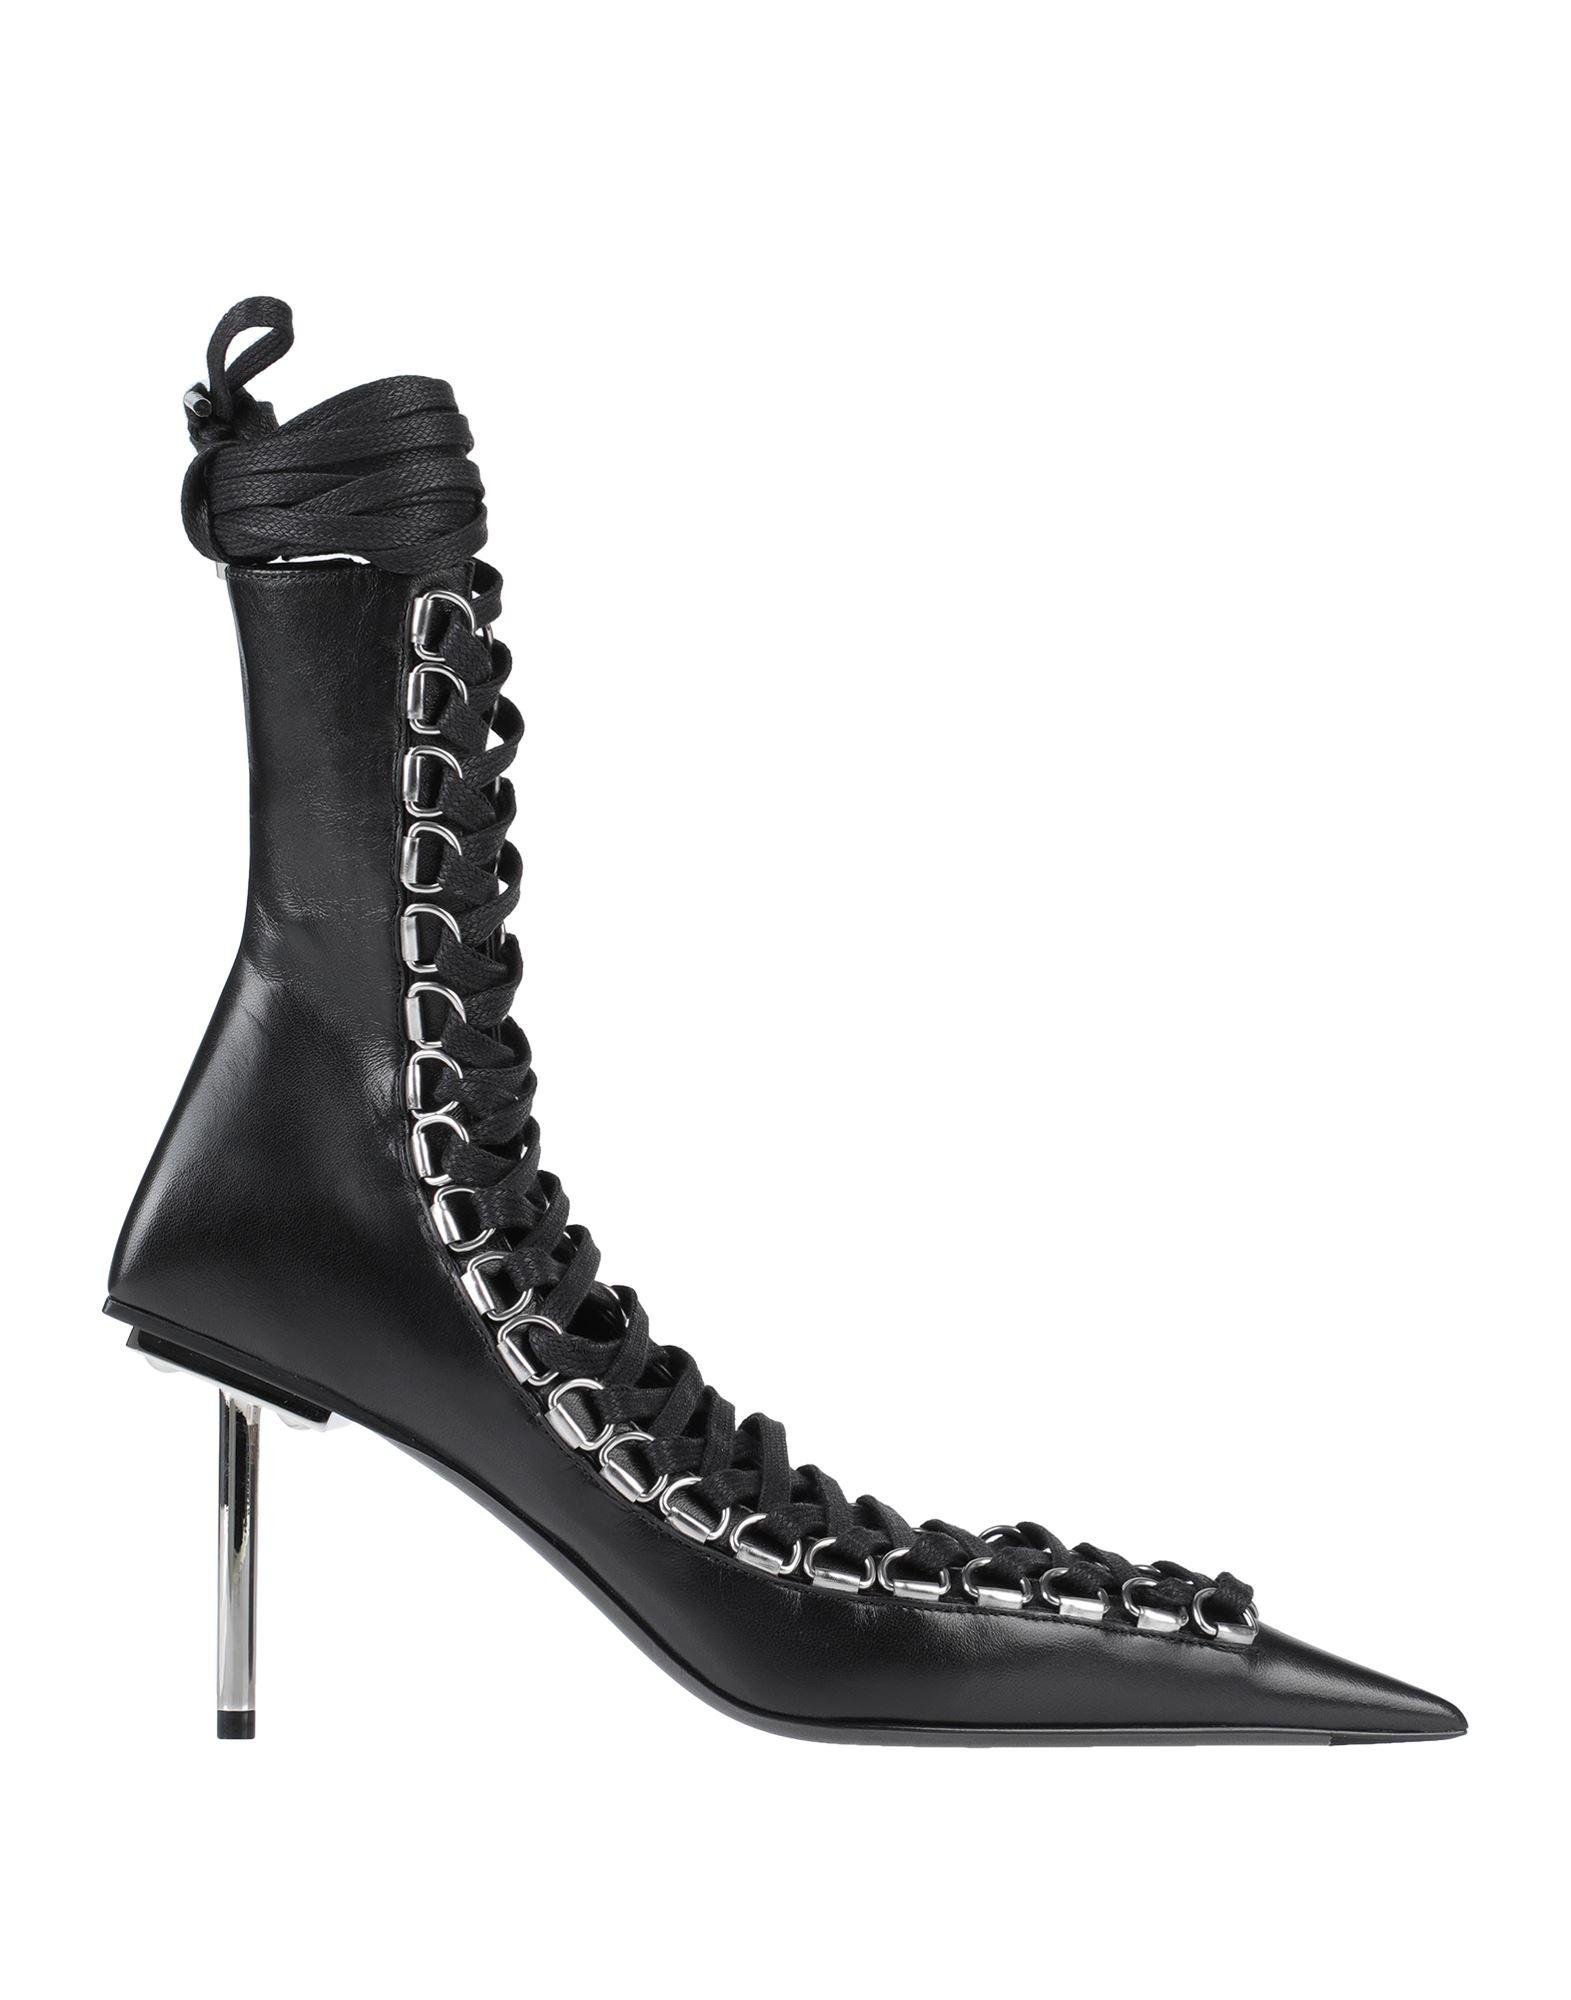 Balenciaga Ankle Boots in Black - Lyst